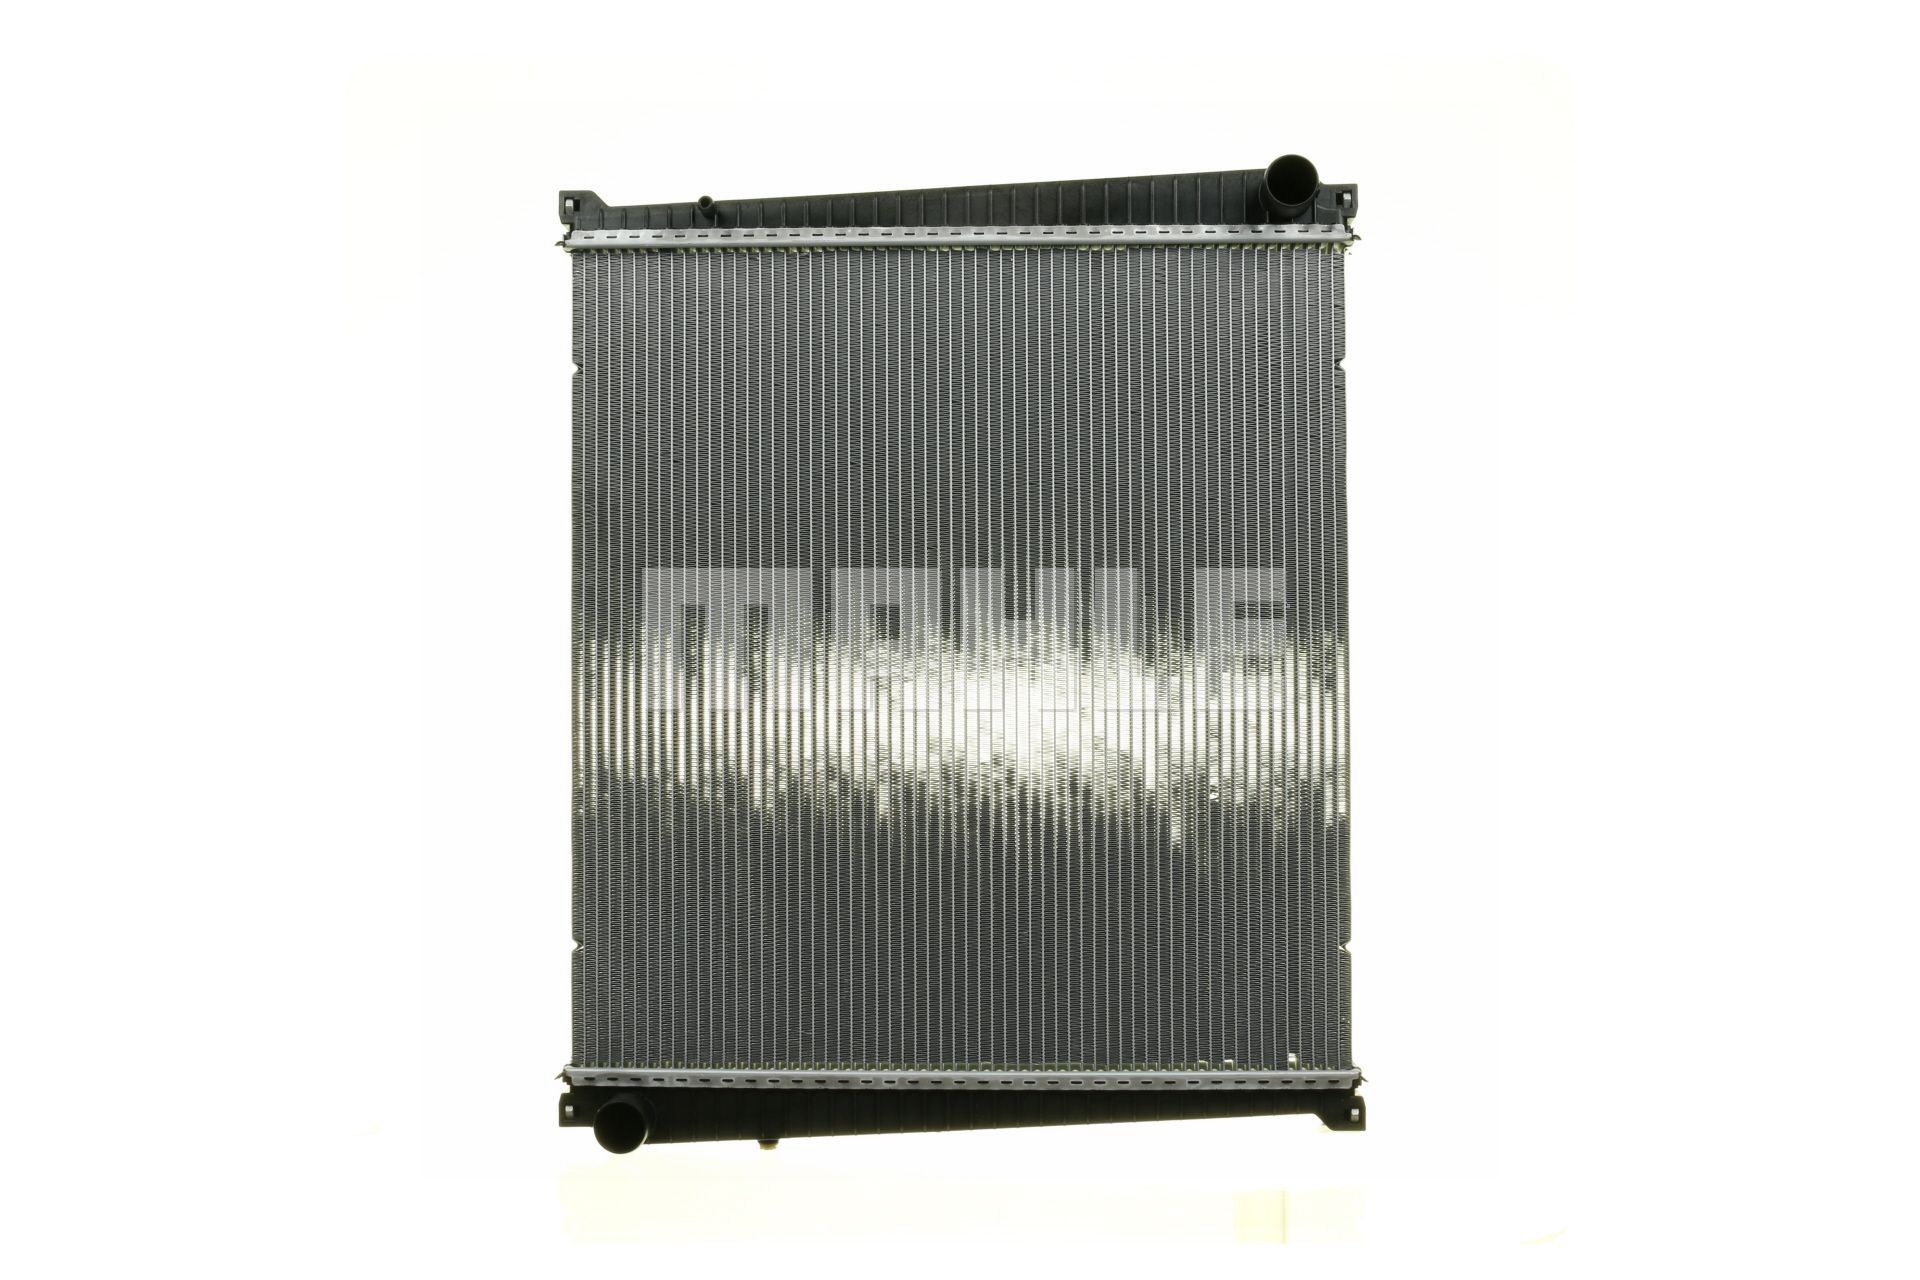 376733701 MAHLE ORIGINAL 623 x 590 x 40 mm, without frame, Brazed cooling fins Radiator CR 818 000P buy